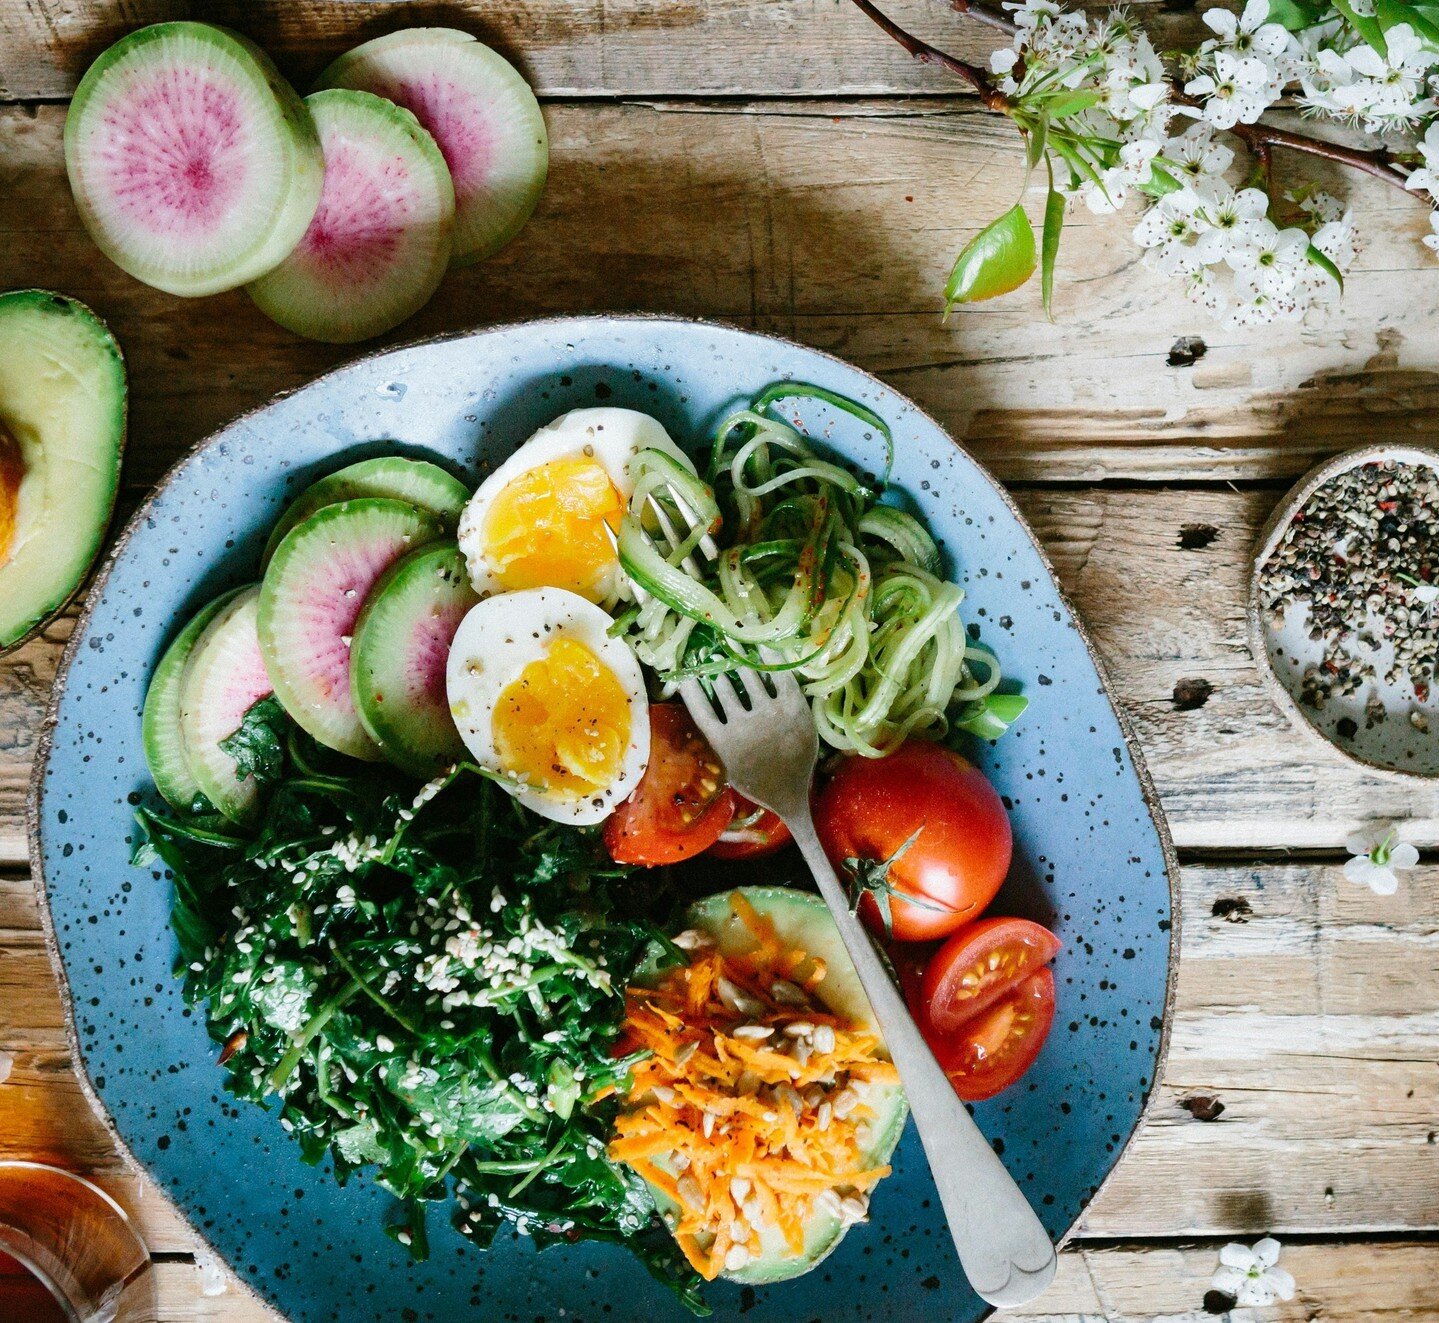 Unlock the potential of good food with LHI's Nutritious Nature program, designed to inspire a gift of health for you and your community

Learn more here: https://loom.ly/dG5Cdcw

#Limitlesshealthinstitute #Nutritiousnature #Health #program #food #med